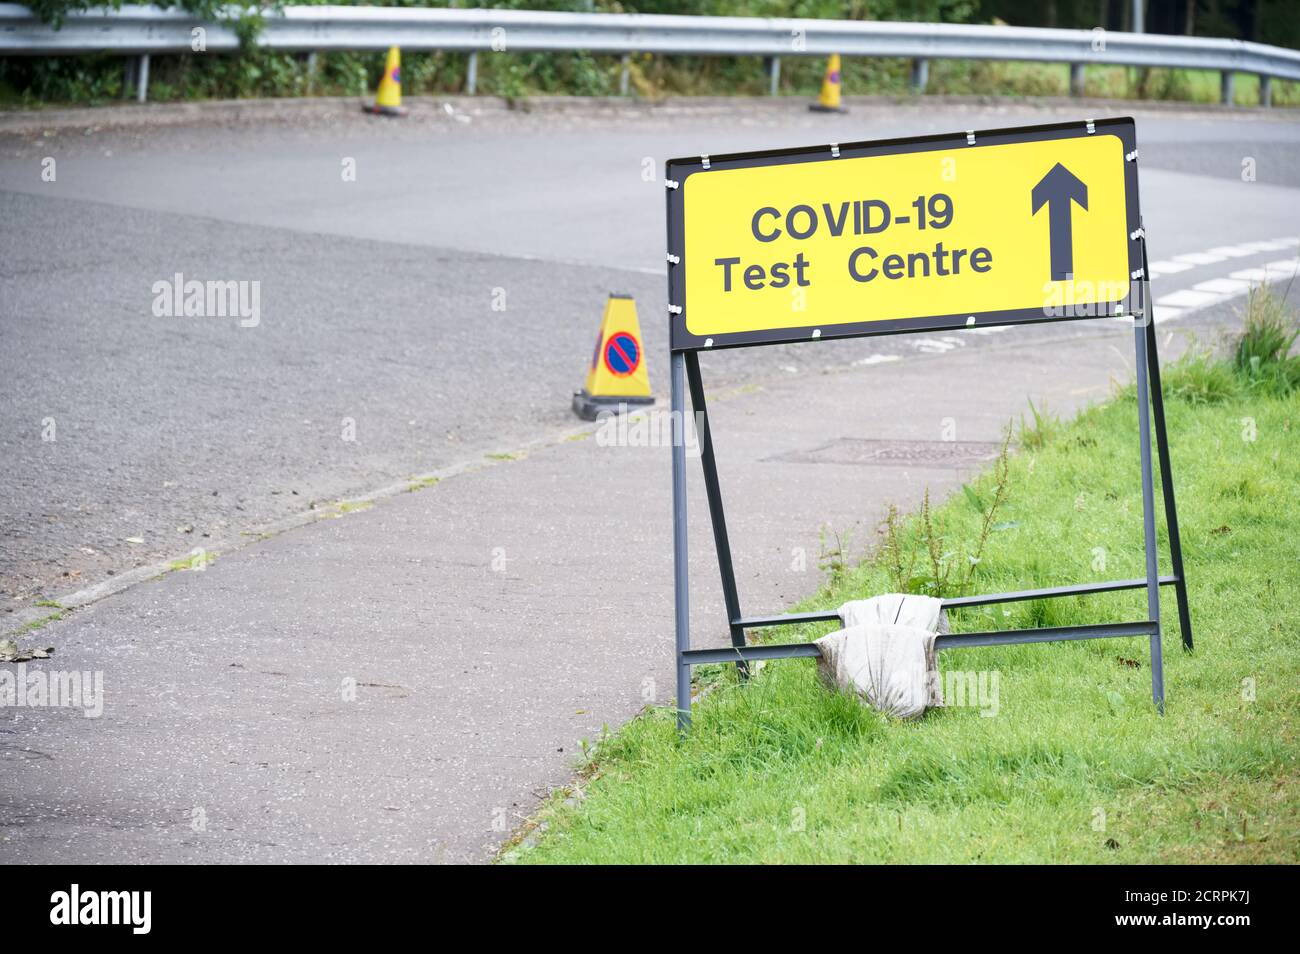 Covid-19 test centre sign at road with traffic cones Stock Photo